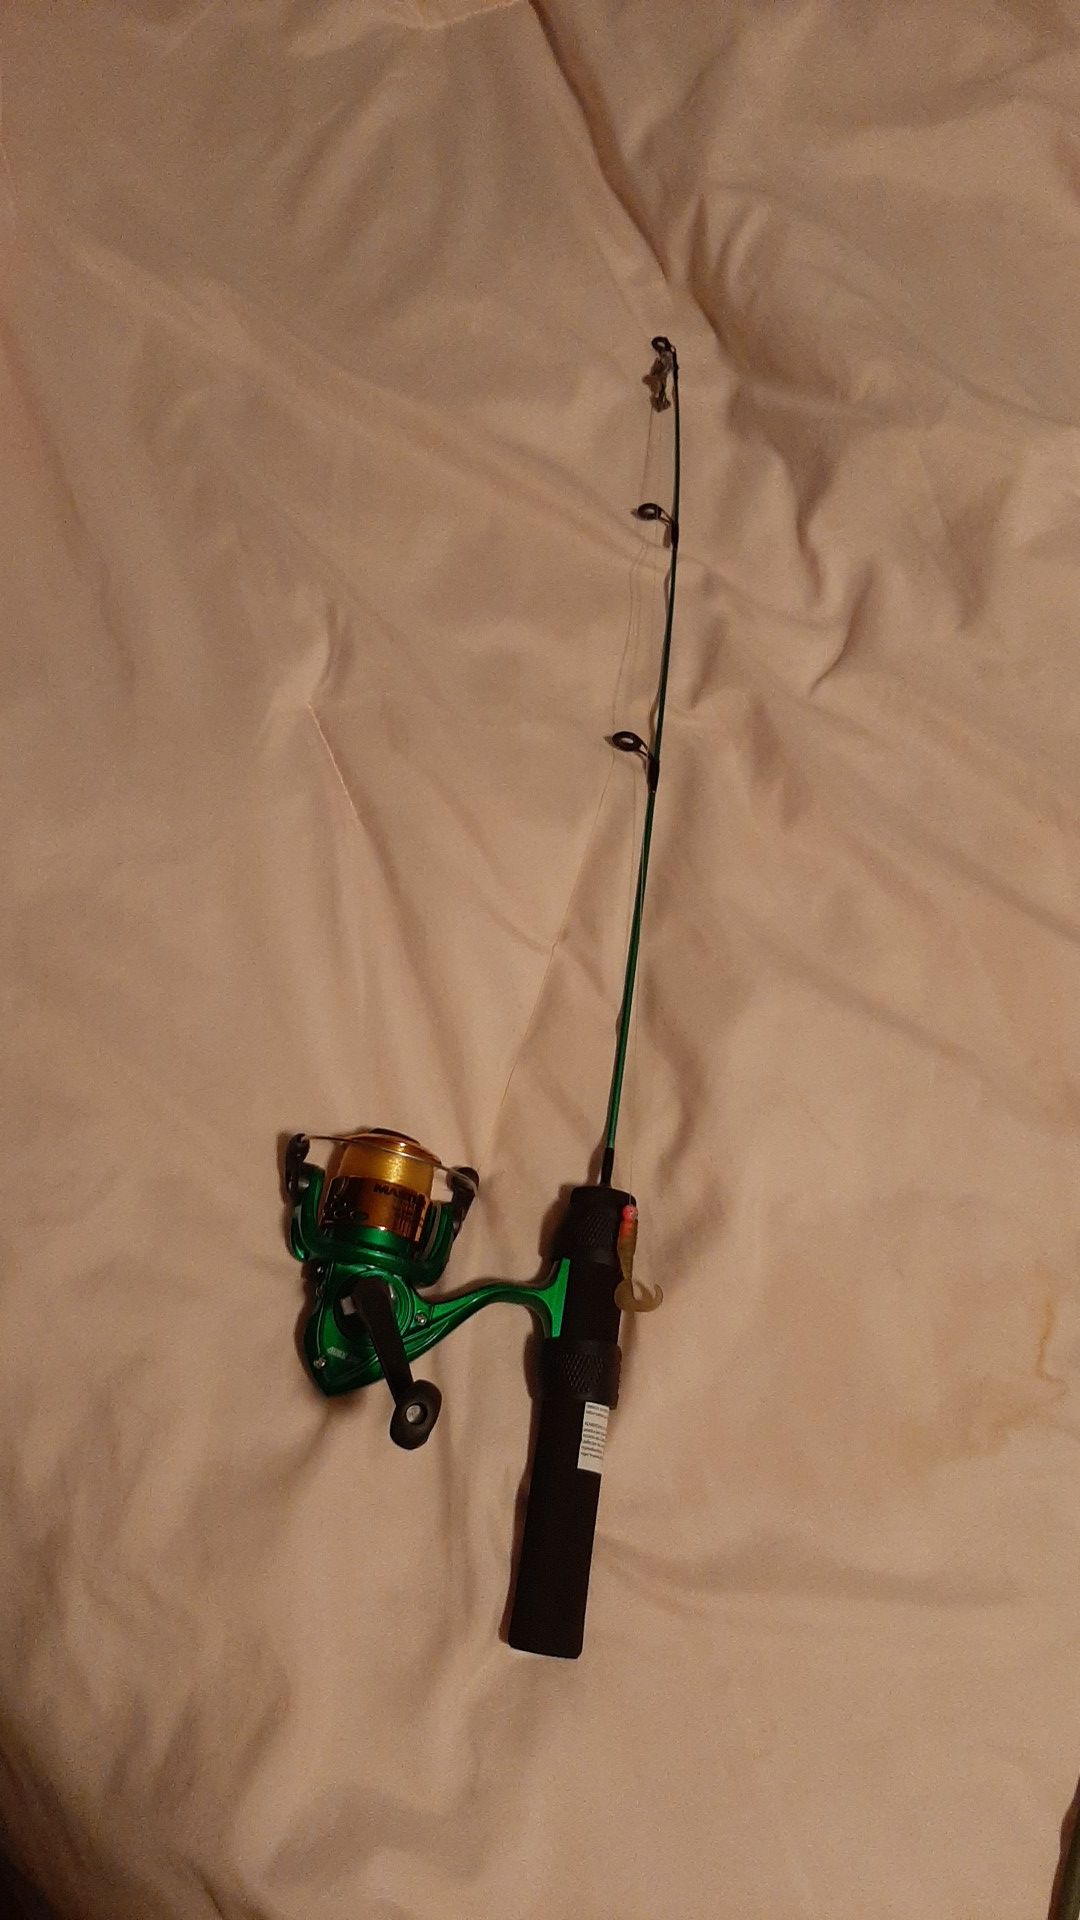 Mighty mite fishing pole